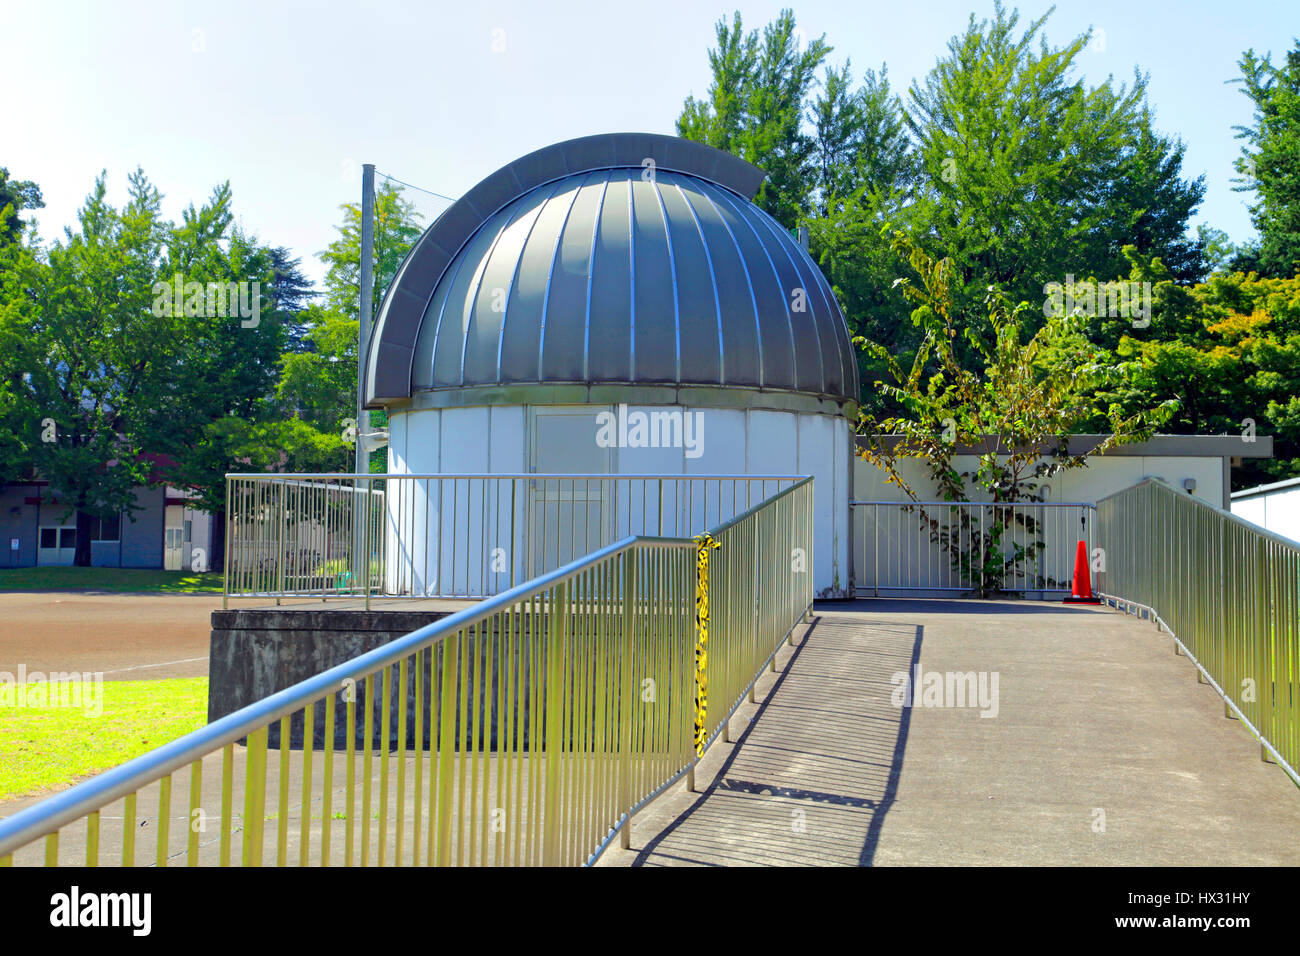 50 cm Telescope for Public Outreach at Mitaka Campus of National Observatory of Japan Stock Photo